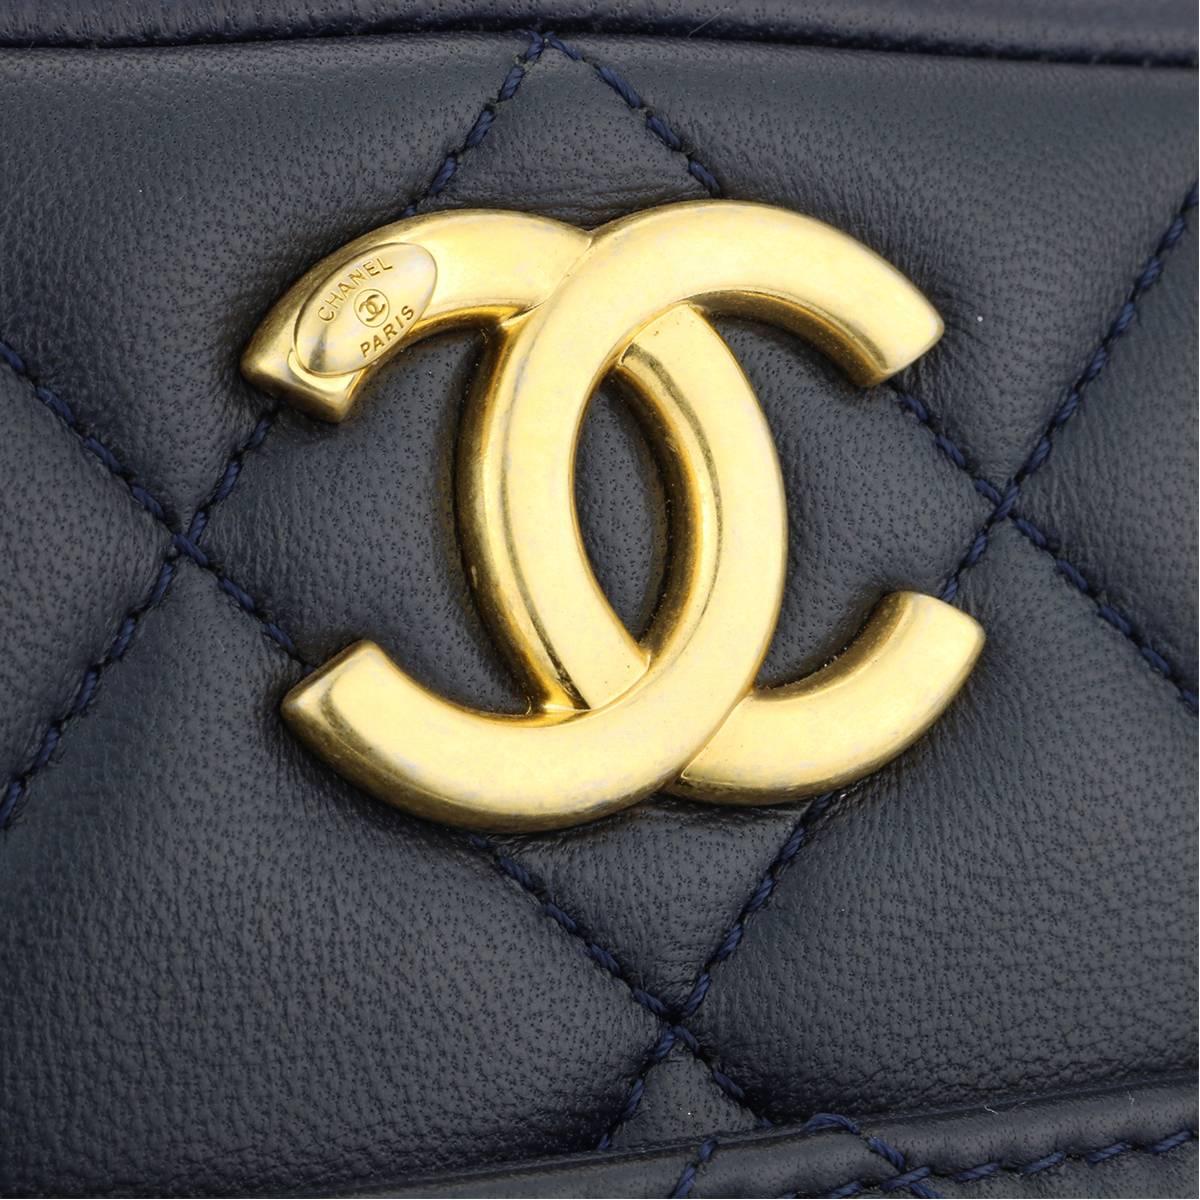 Authentic CHANEL Trendy CC Bowling Small Navy Lambskin with Gold Hardware 2016.

This stunning bag is in a mint condition, the bag still holds its original shape, and the hardware is still very shiny.

Exterior Condition: Mint condition, corners